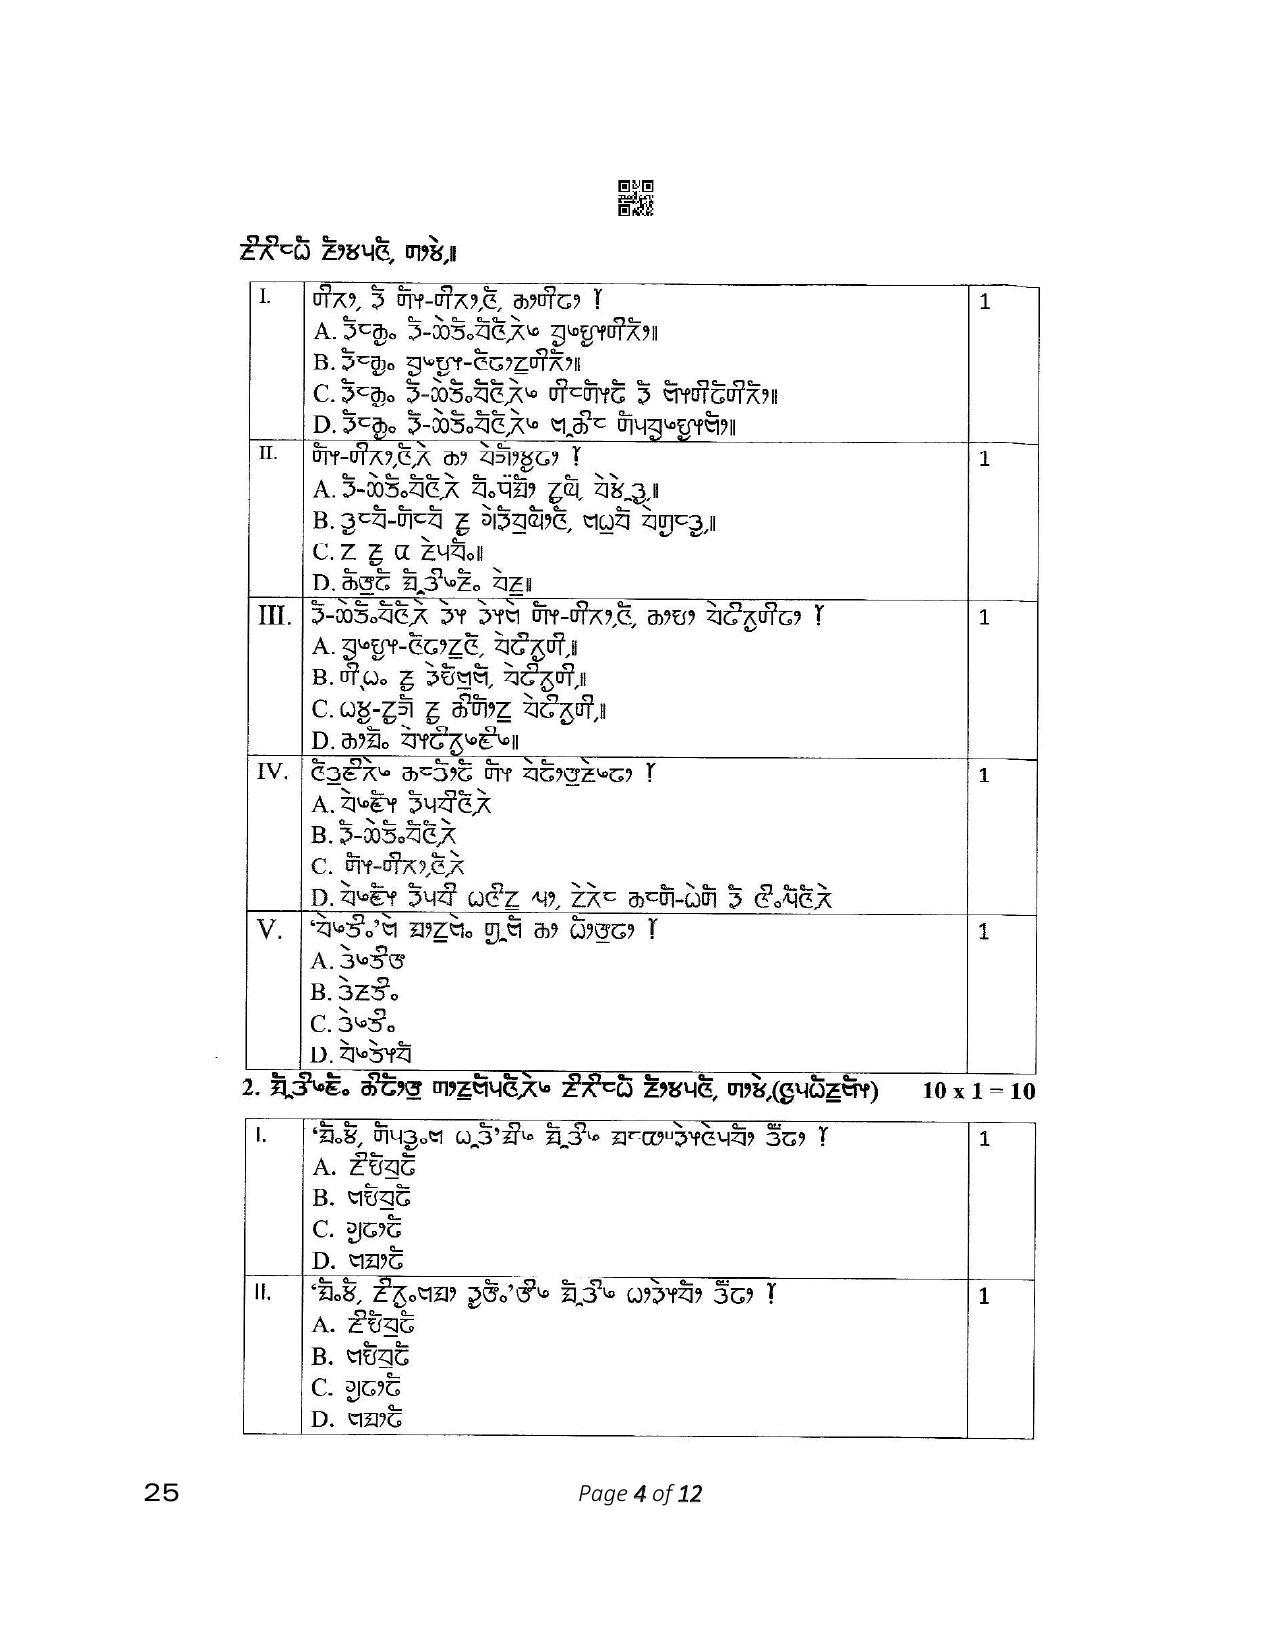 CBSE Class 12 25_Limboo 2023 Question Paper - Page 4